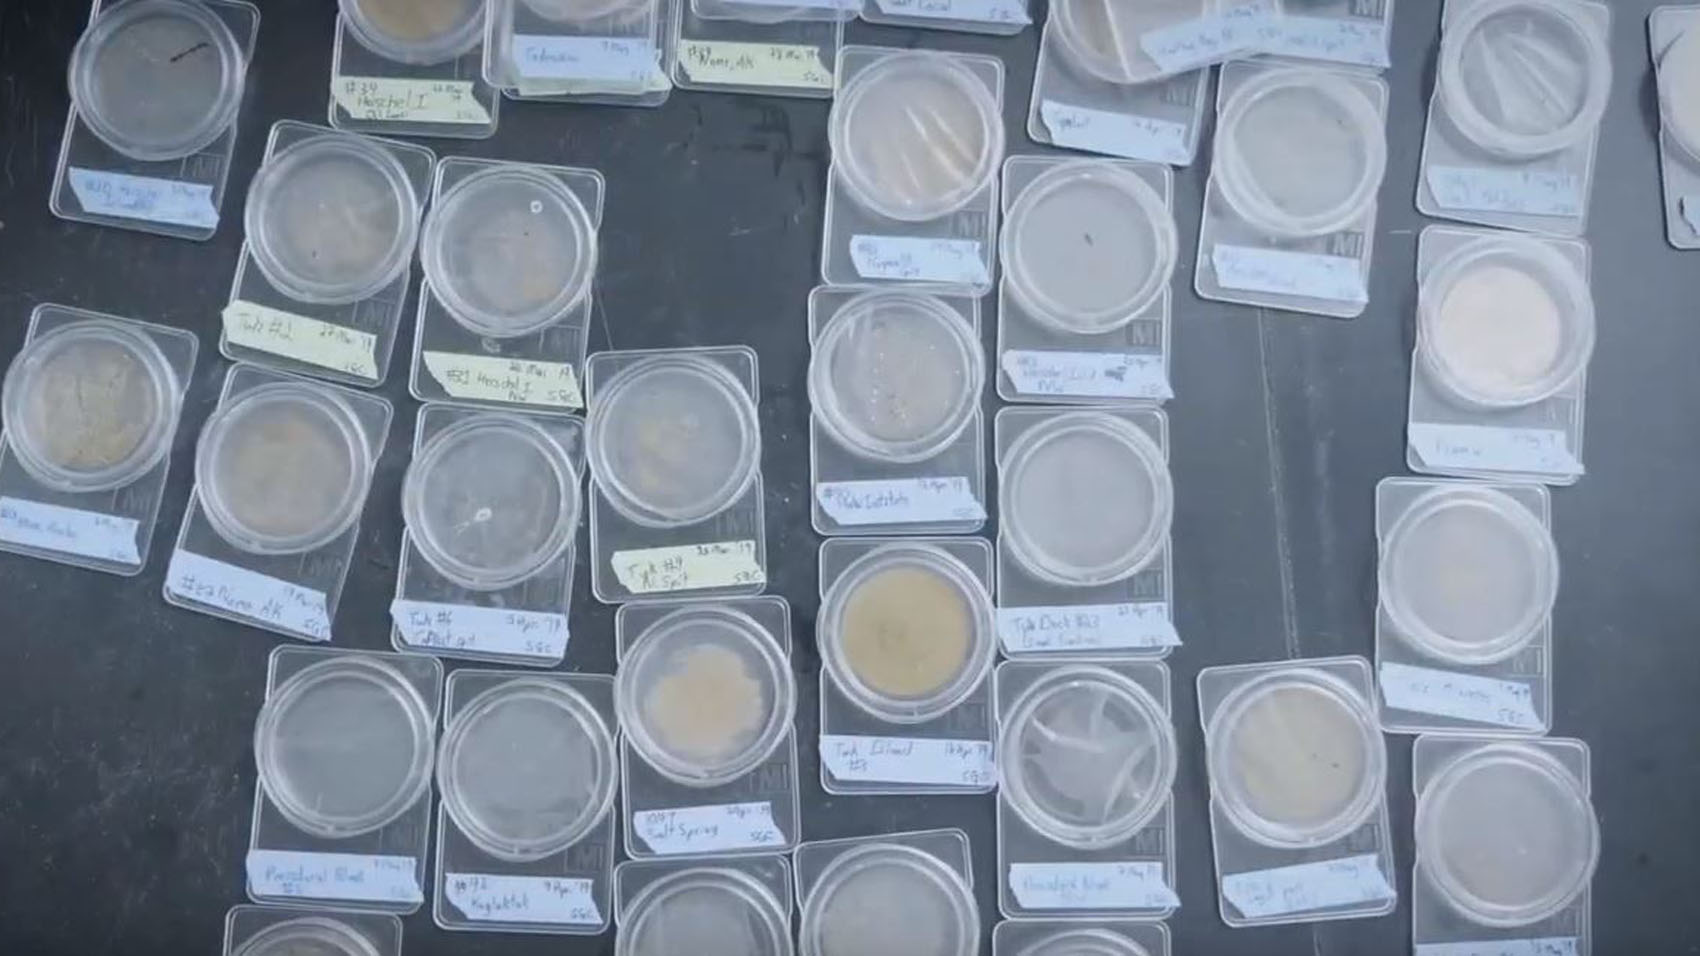 samples of water being tested for microplastics